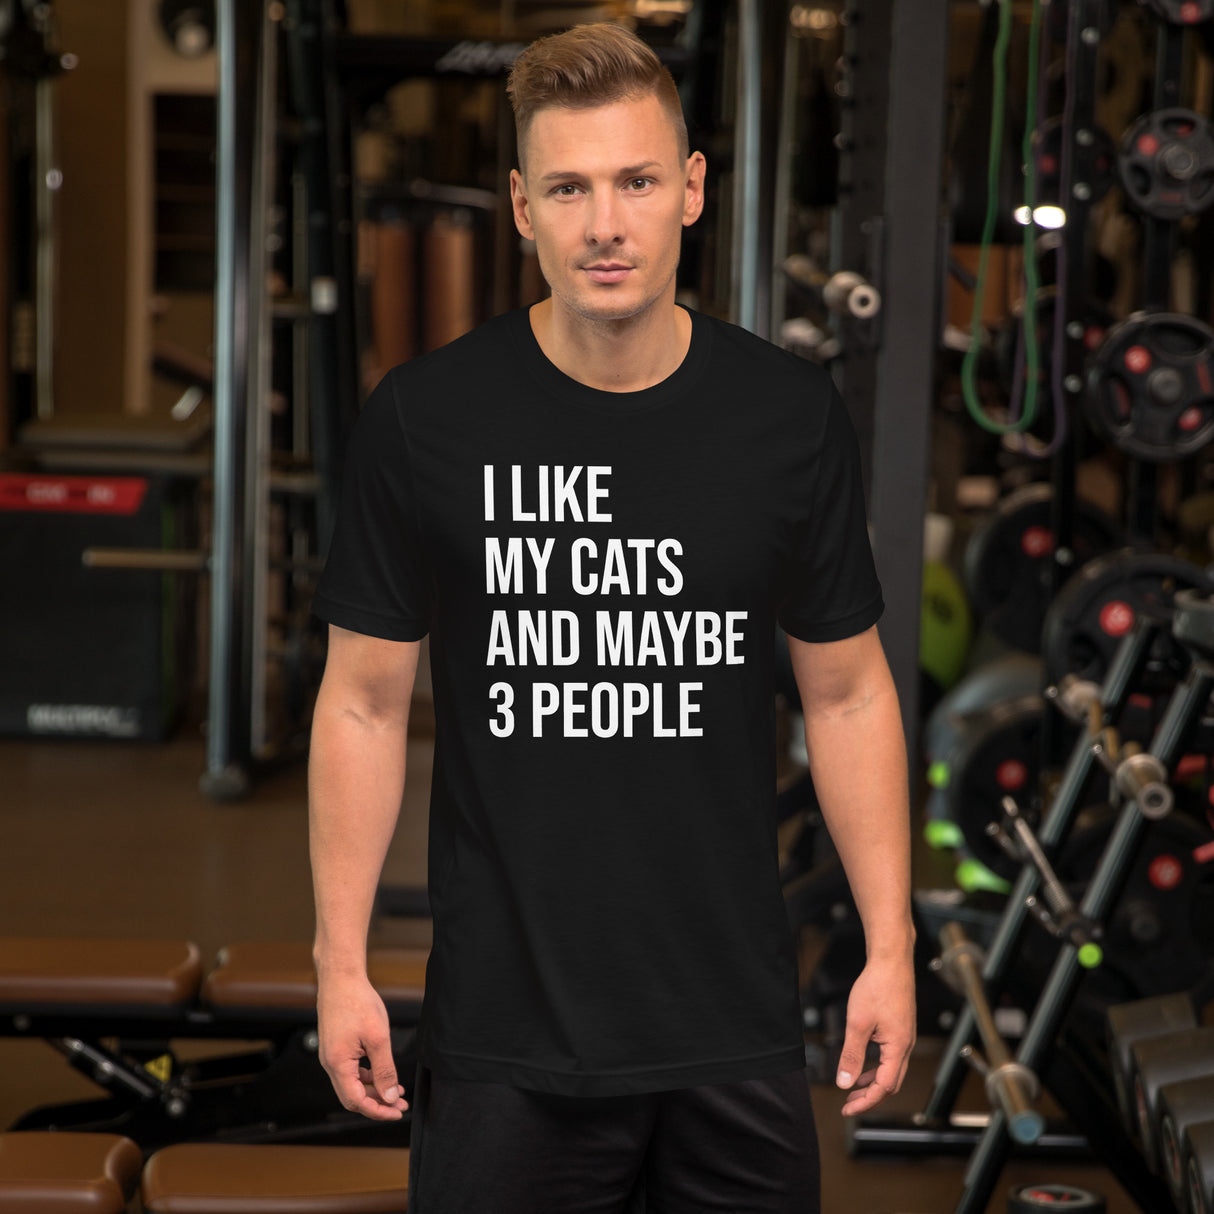 I Like Cats and Maybe 3 People Men's Shirt